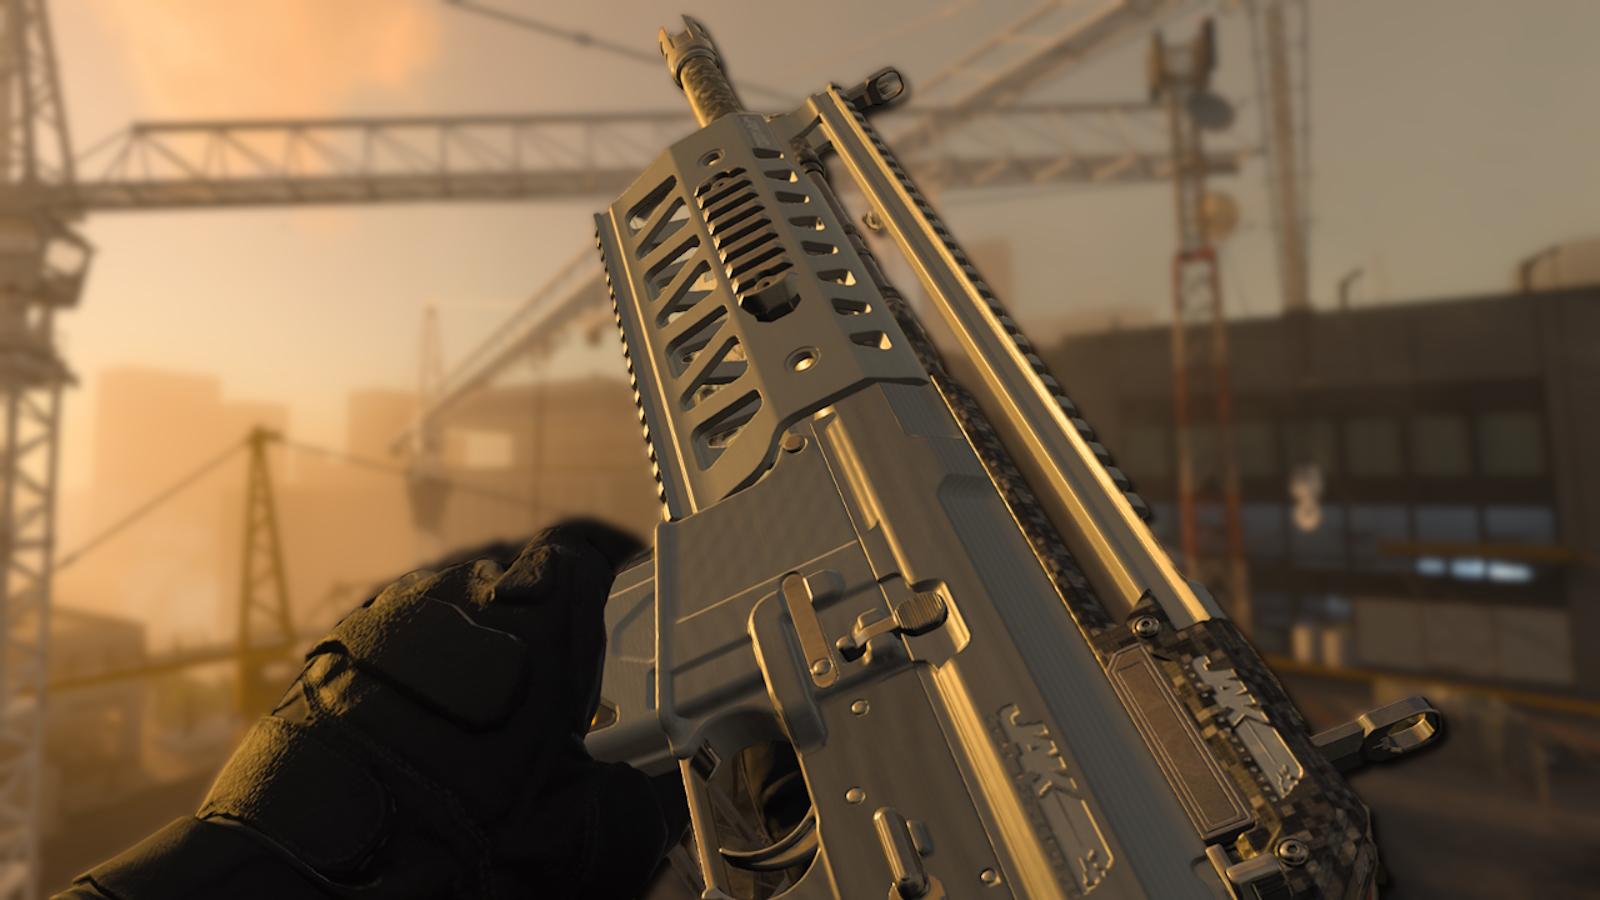 AMR9 with JAK Atlas conversion kit equipped in MW3 and Warzone.